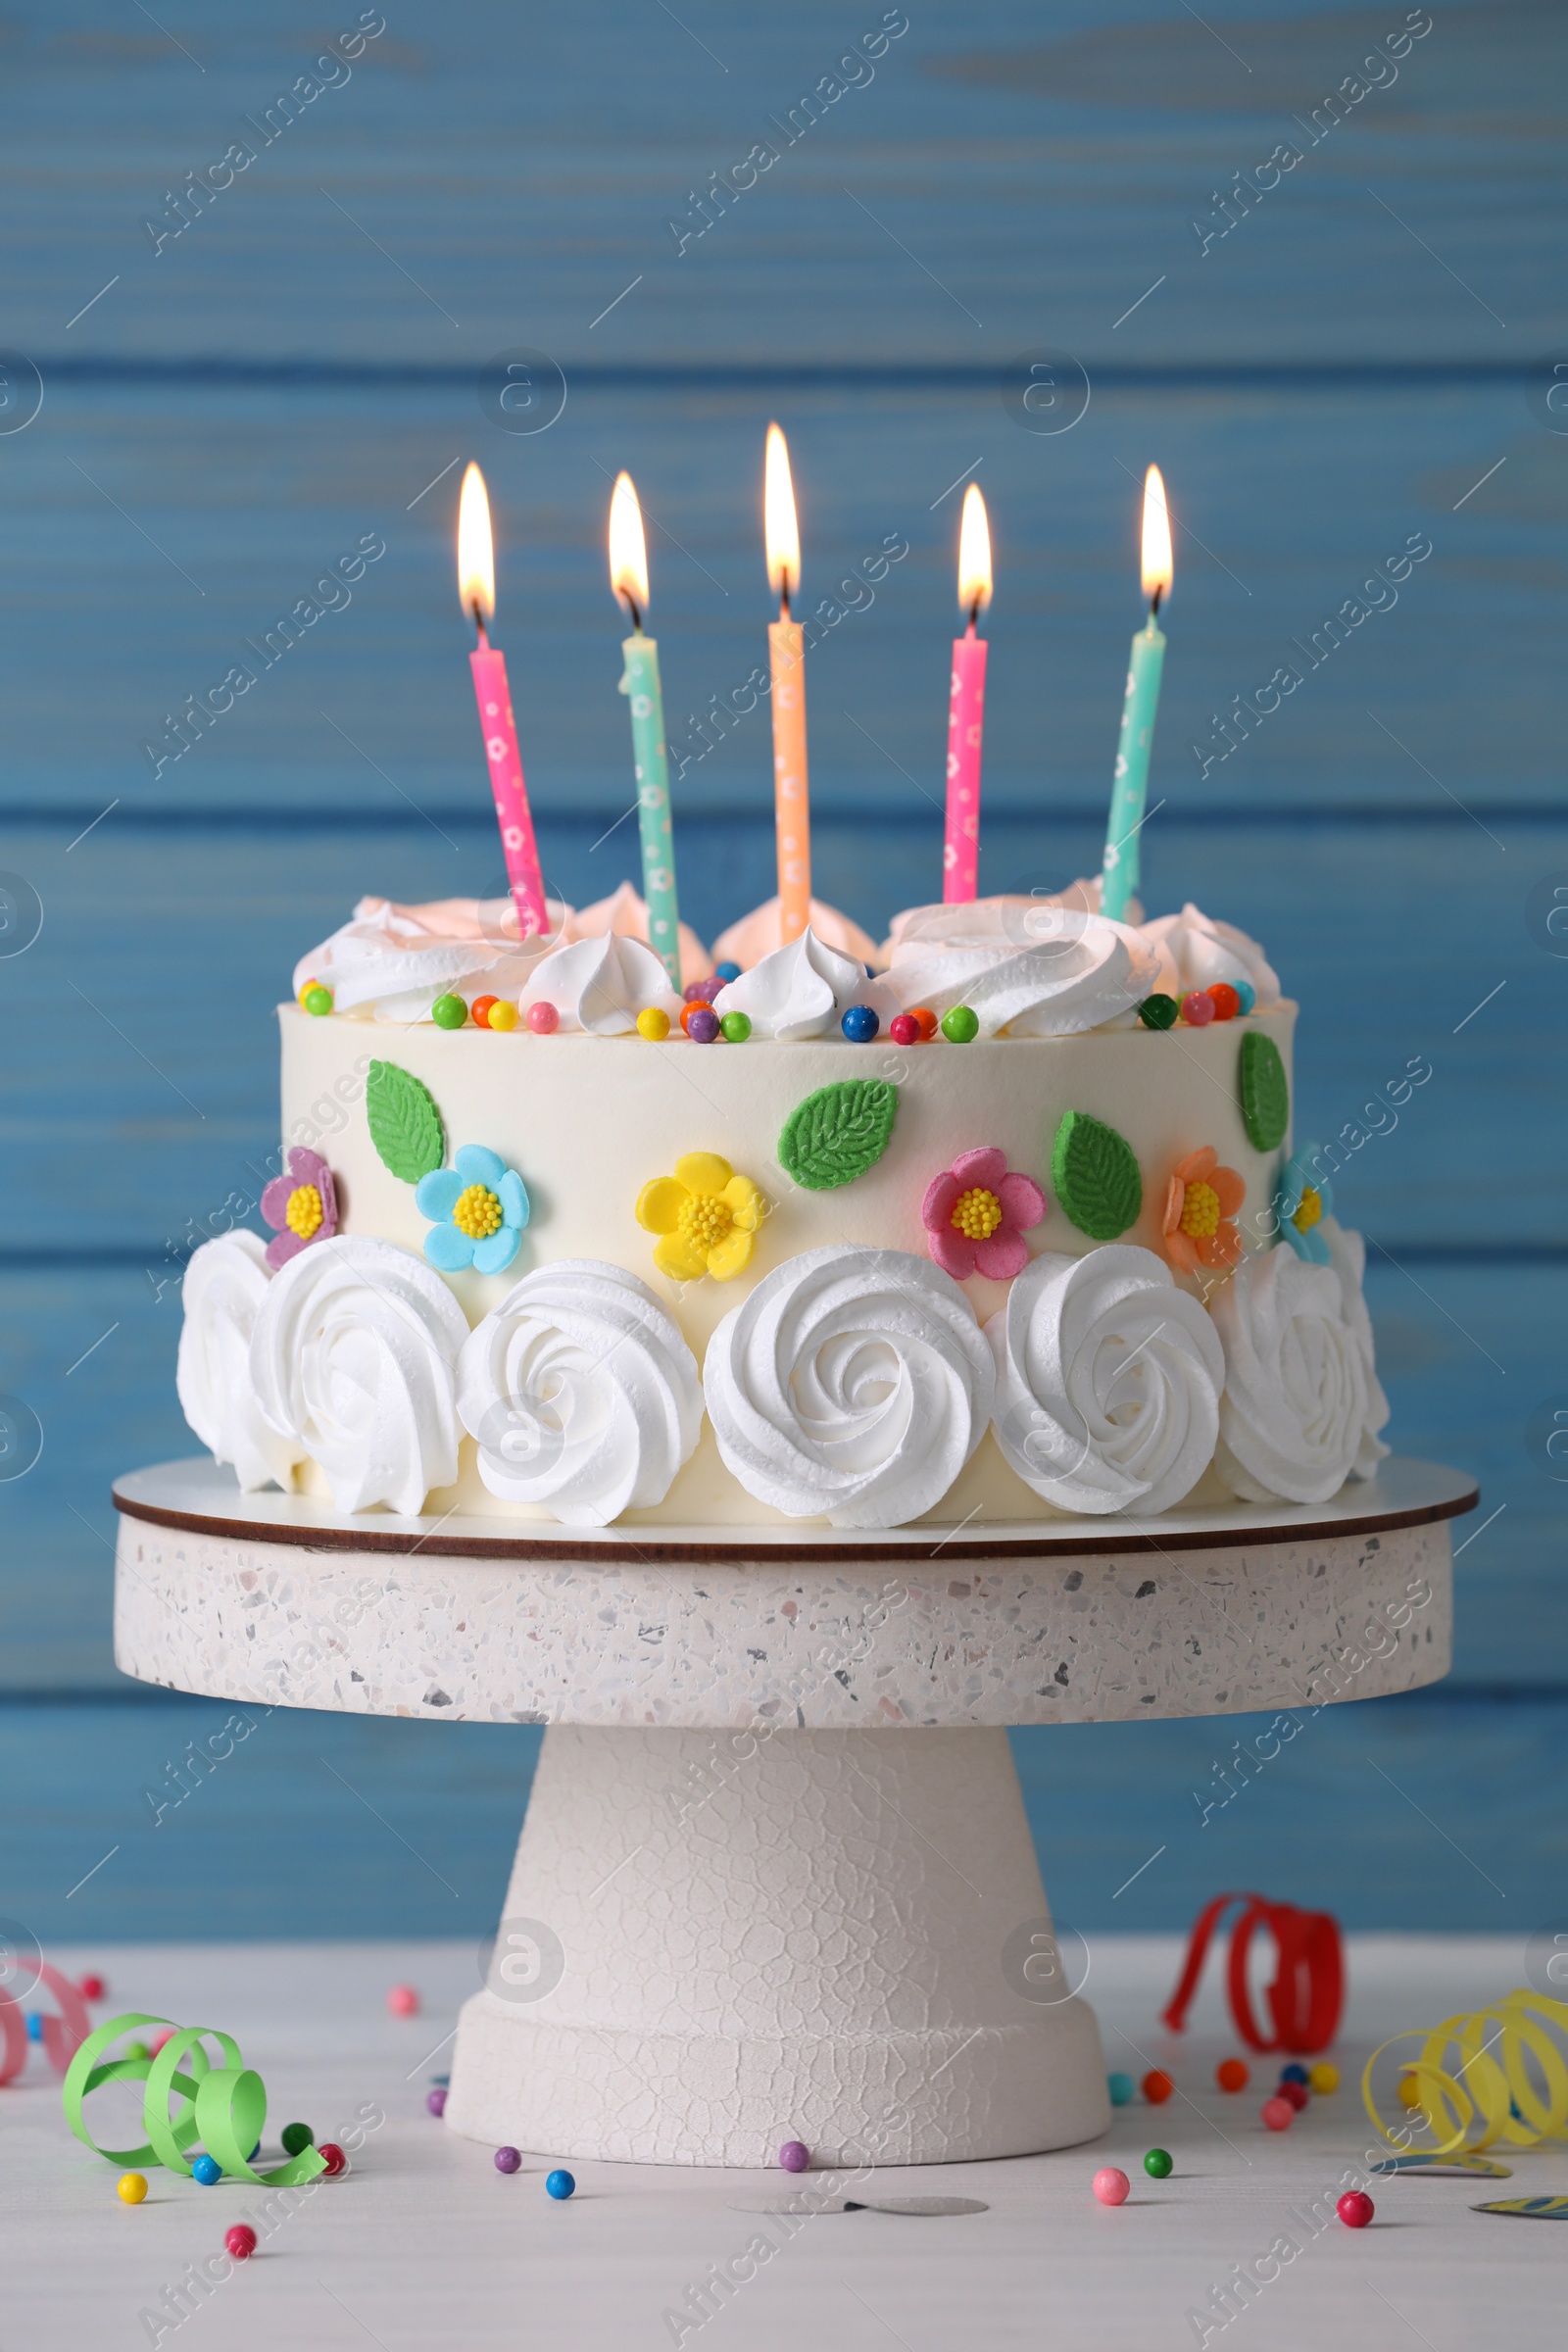 Photo of Delicious birthday cake and party decor on white wooden table against light blue background